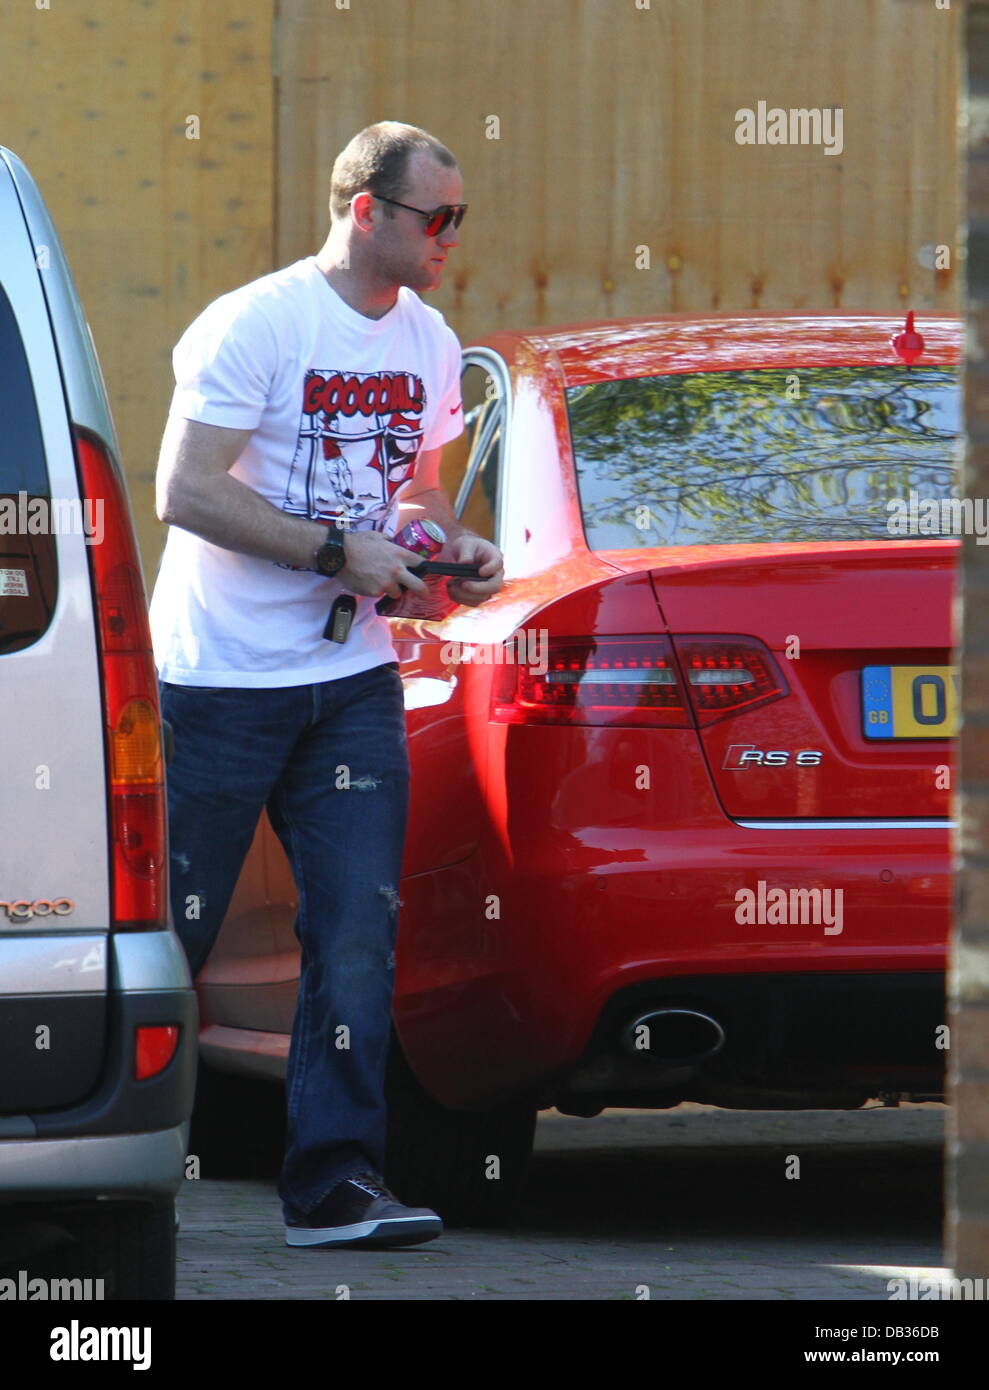 Wayne Rooney getting into his car at his wife's parents' house wearing a Nike t-shirt with the word 'Goooal!' written on it. Liverpool, England - 09.04.11 Stock Photo